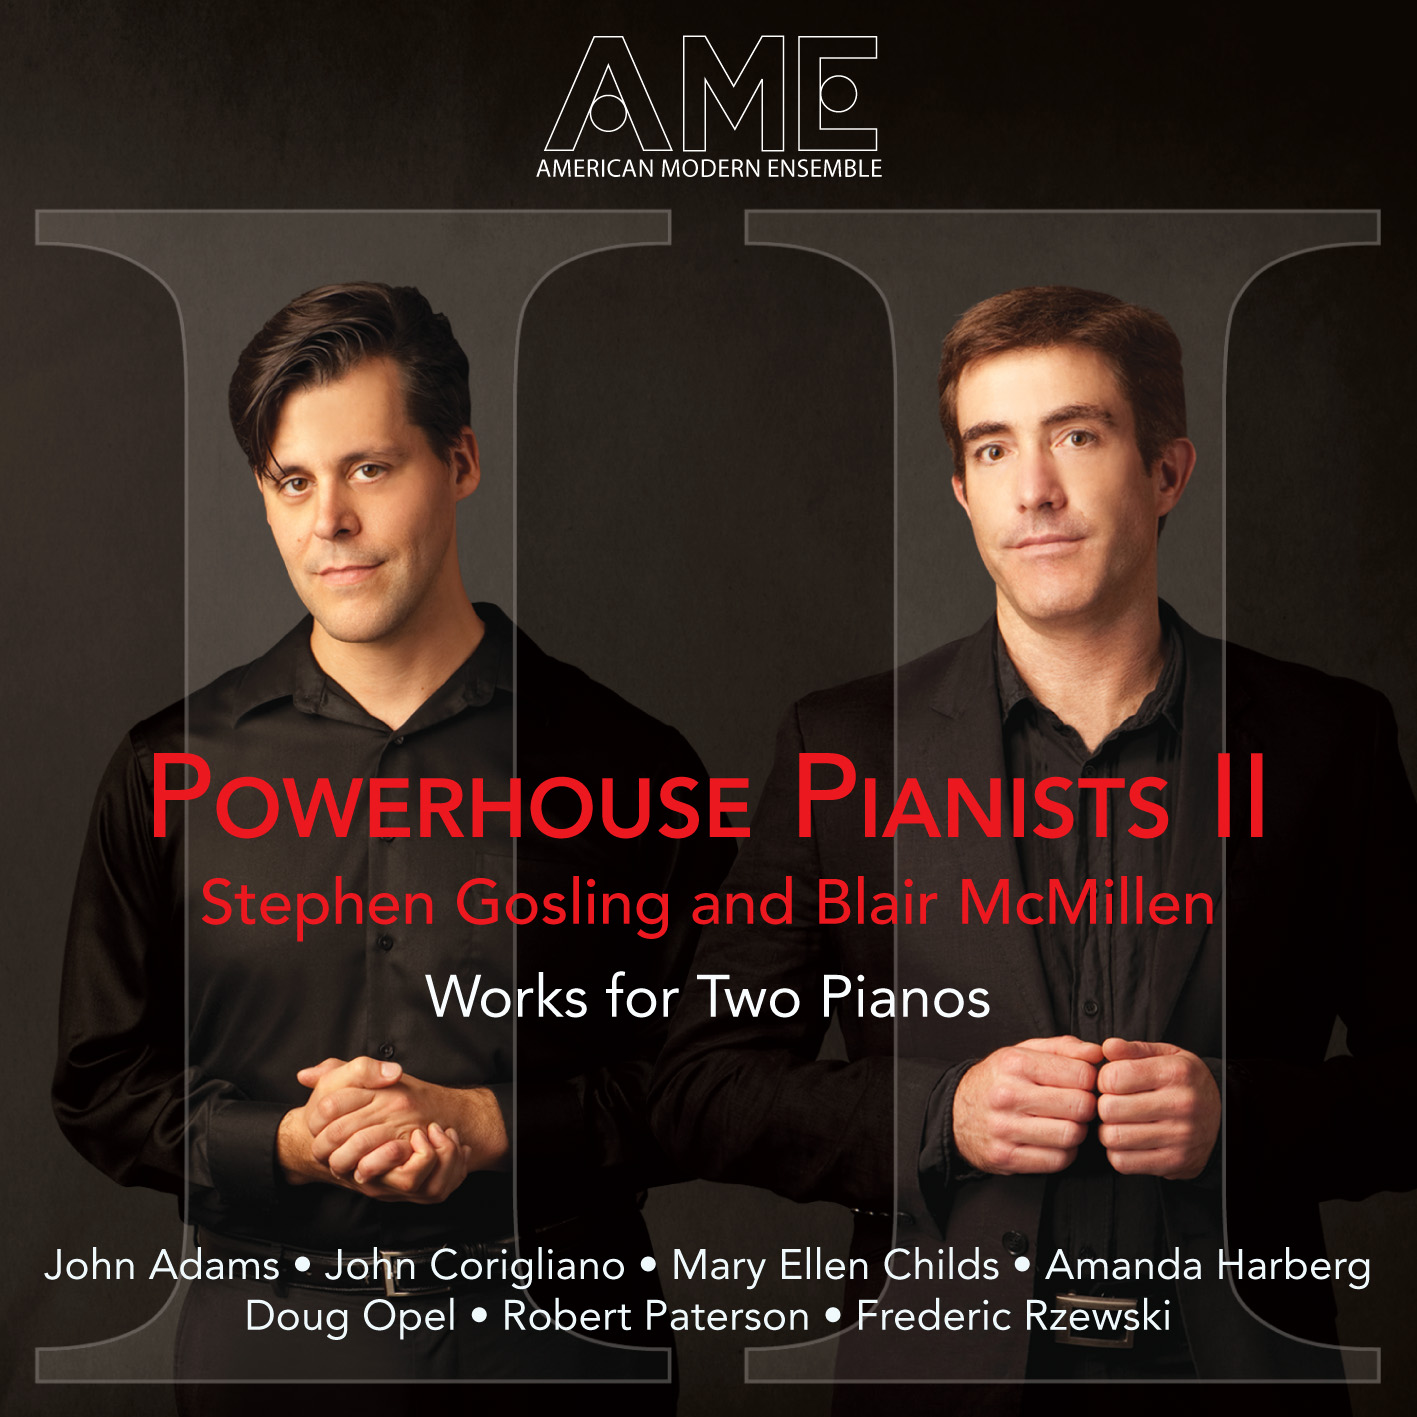 AME - Powerhouse Pianists II - Stephen Gosling and Blair McMillen